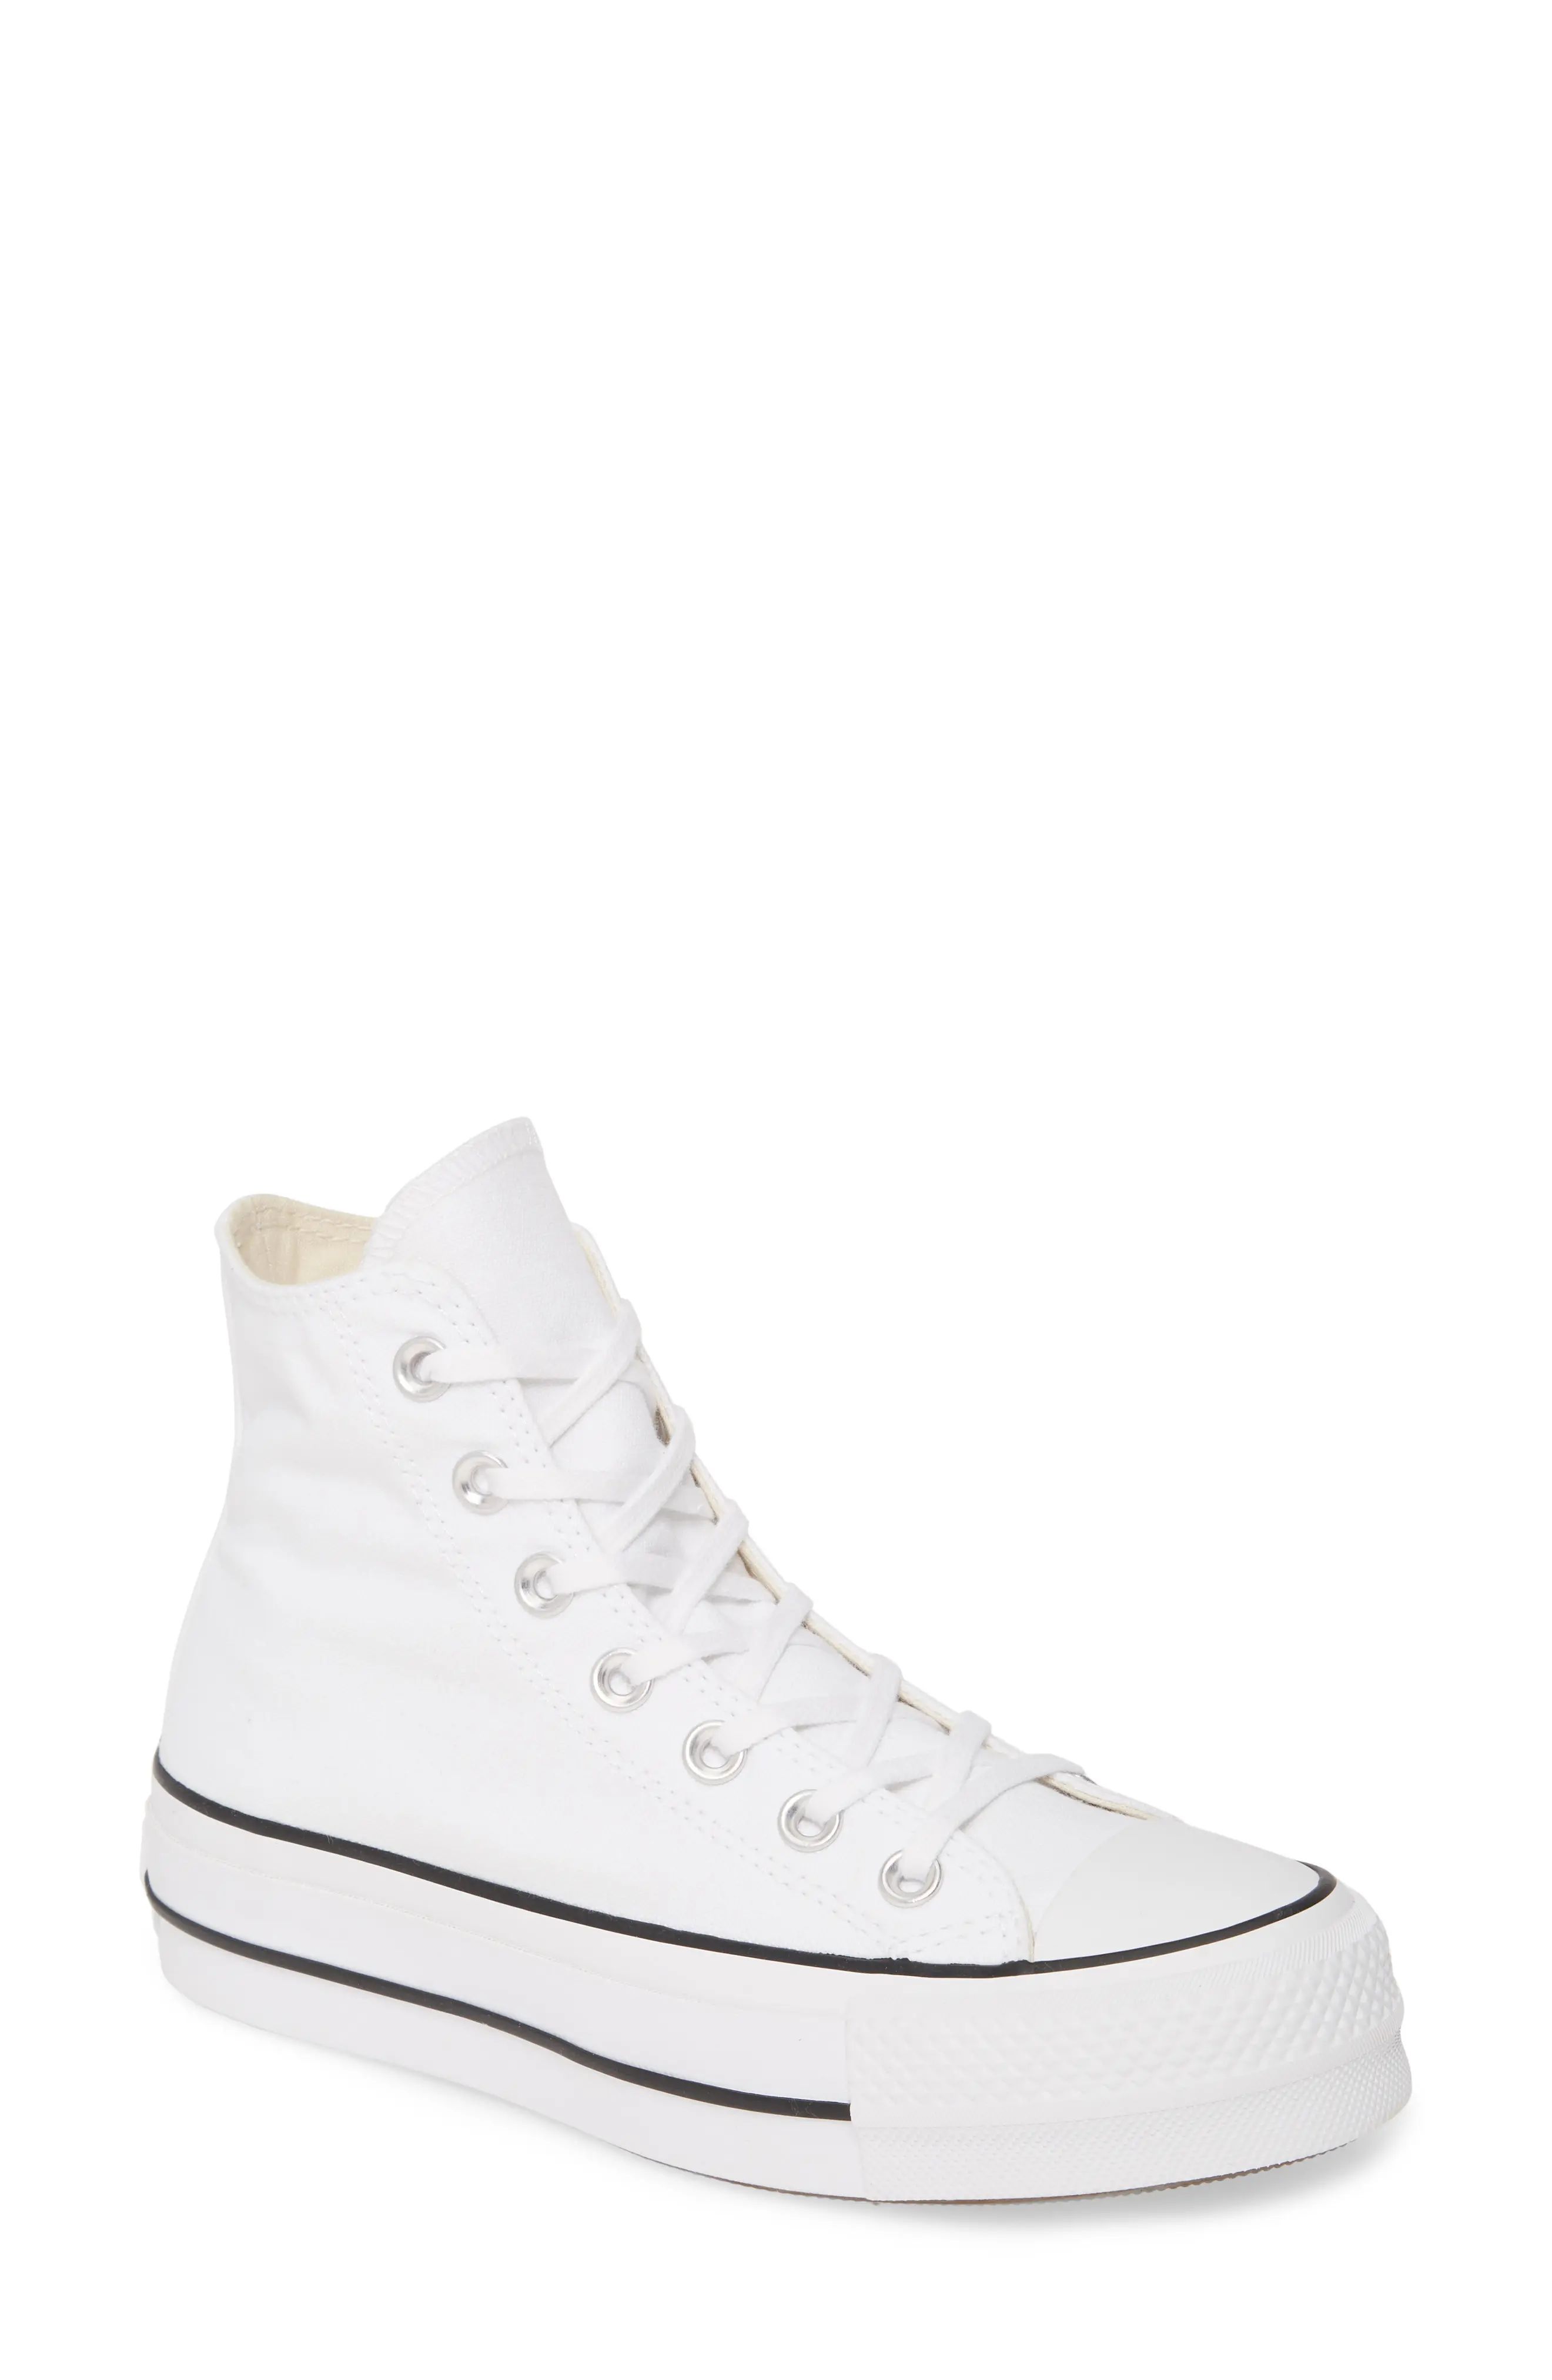 Converse Chuck Taylor(R) All Star(R) Lift High Top Platform Sneaker in White/Black/White at Nordstro | Nordstrom